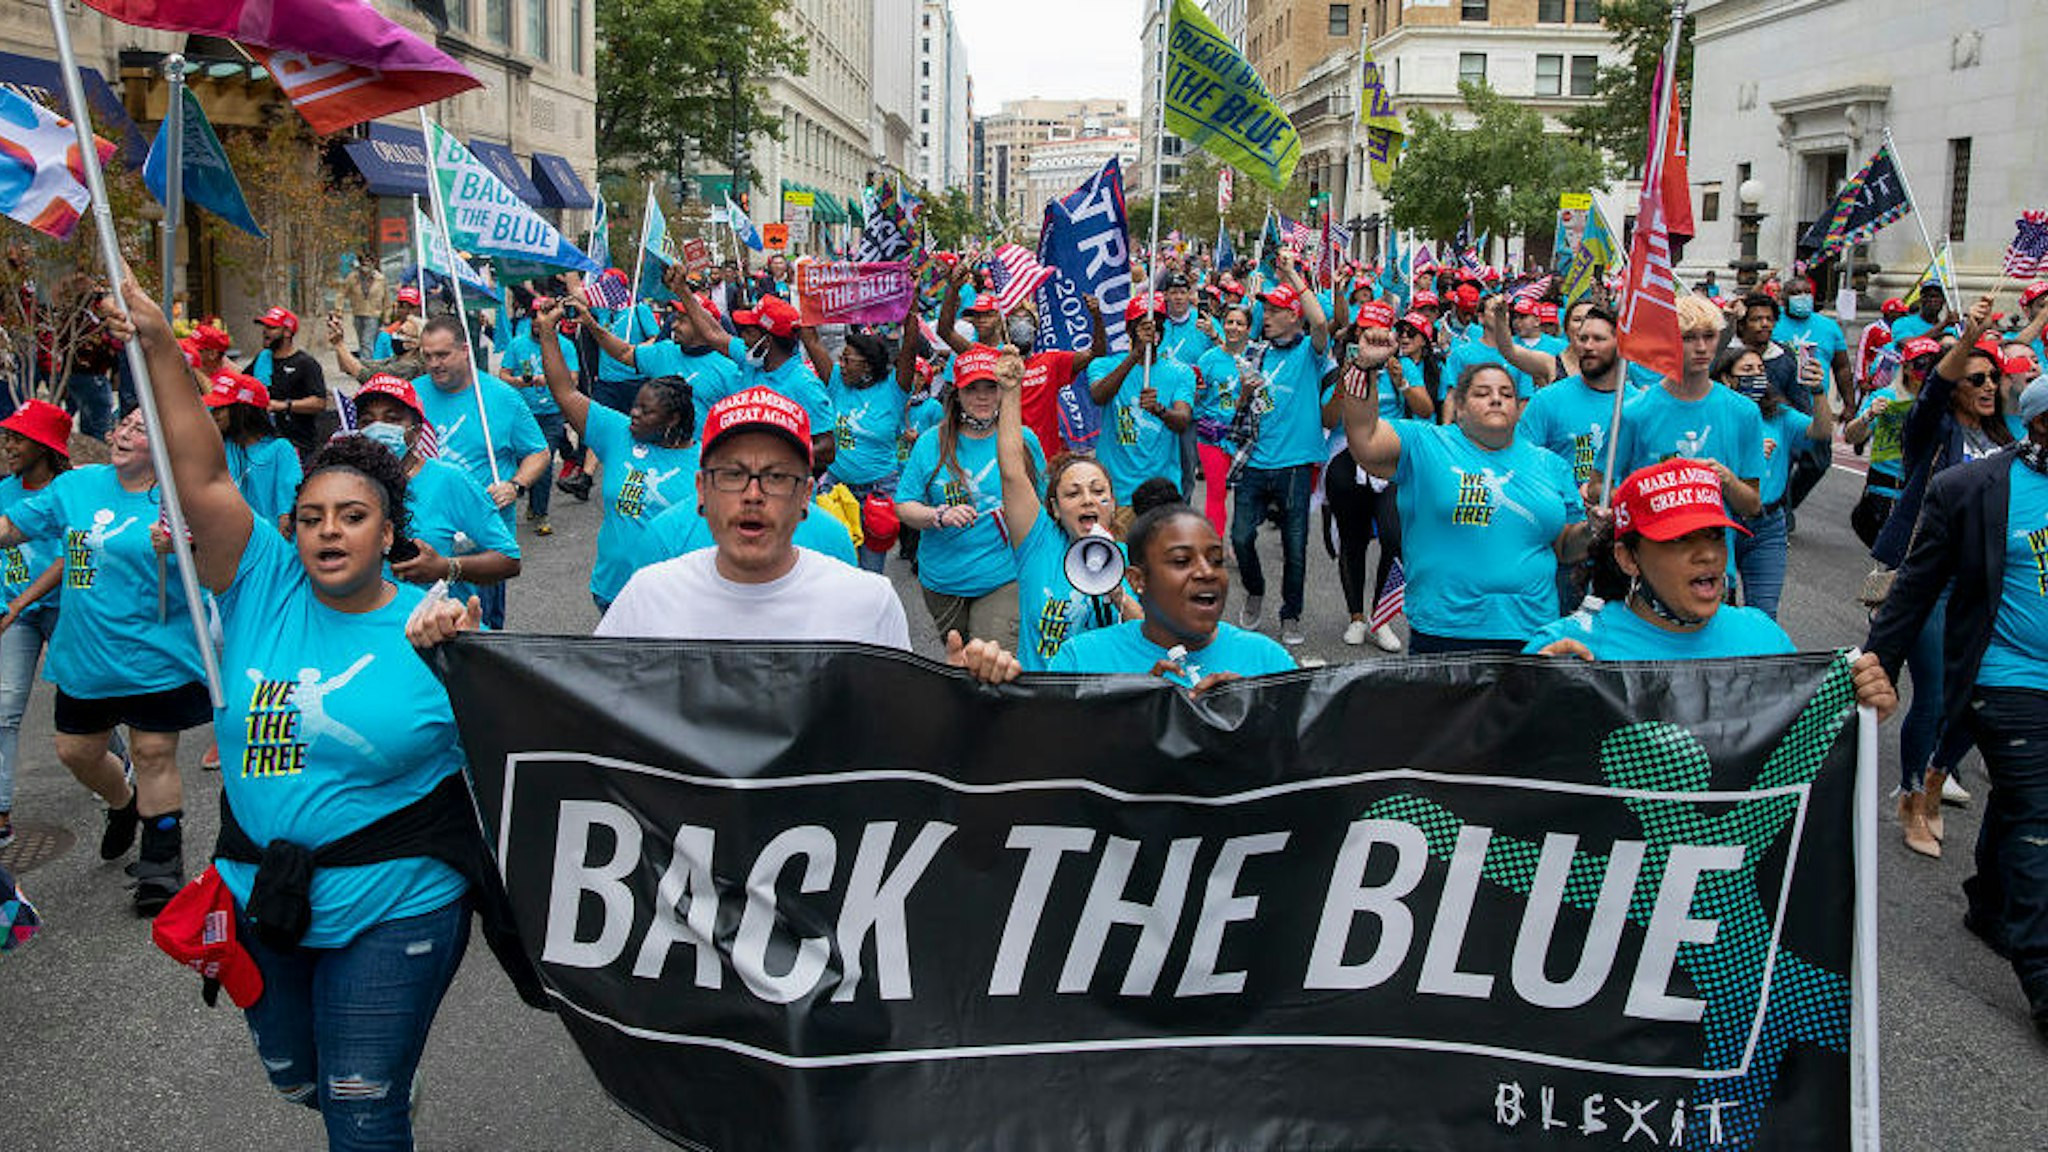 Members of Blexit march with the message "Back the Blue" after attending a rally on the South Lawn of the White House hosted by U.S. President Donald Trump on October 10, 2020 in Washington, DC.